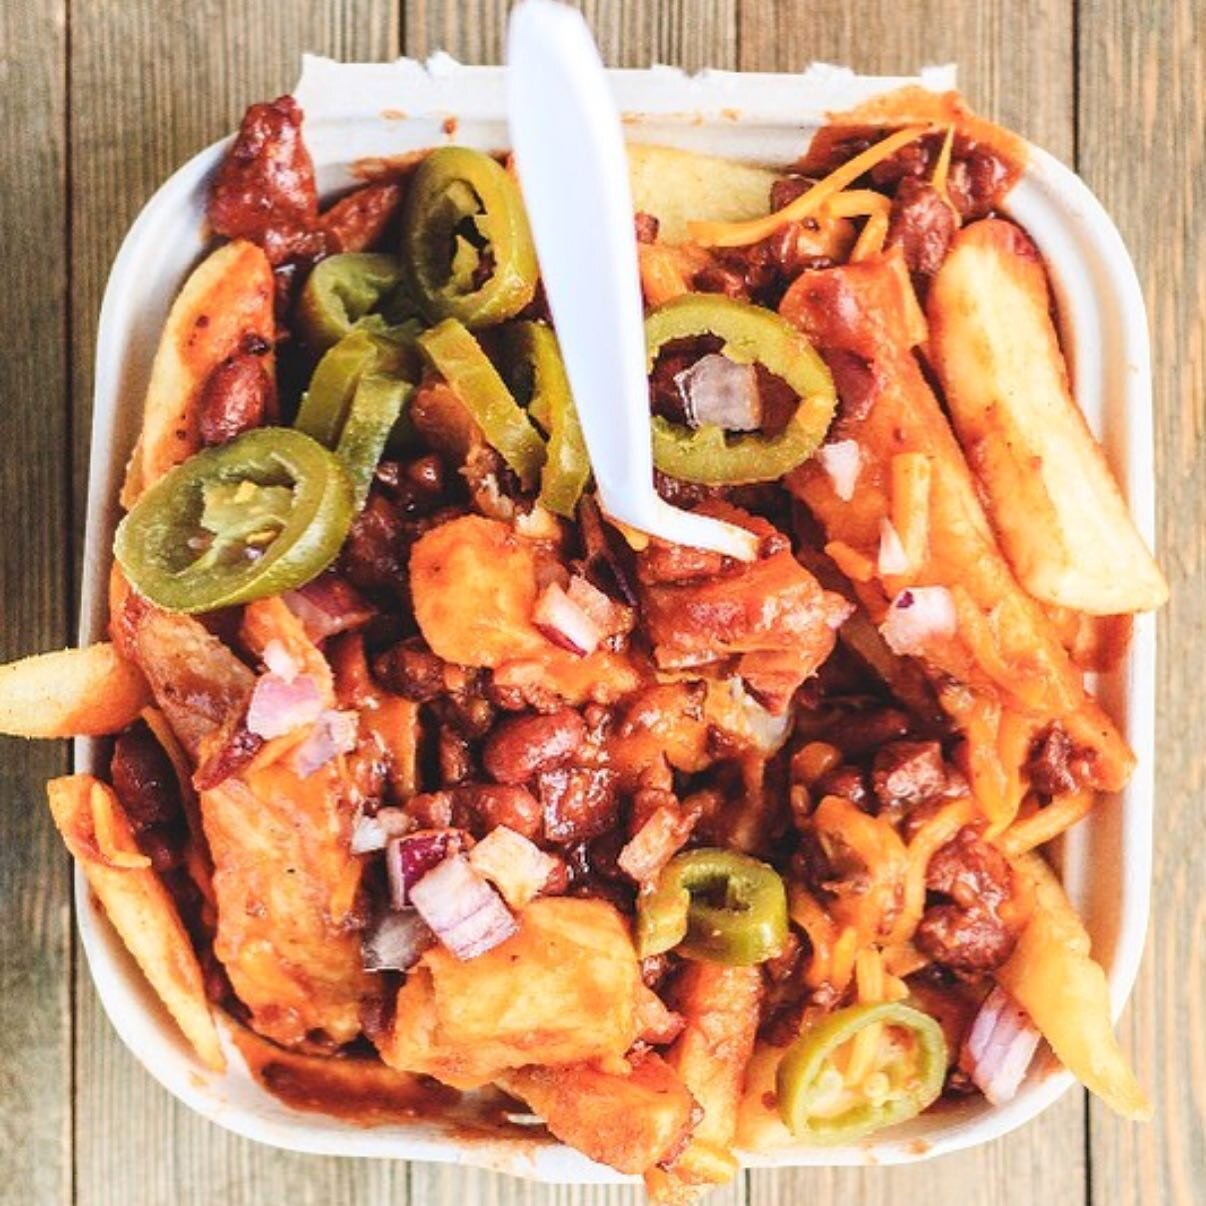 FAT FRY-DAY all day today! $1 off all fries, all of which will be FAT, Steak Cut and loaded (or dipped) with toppings and sides of your choice! NO SKINNY FRIES TODAY. See you soon! 🍟